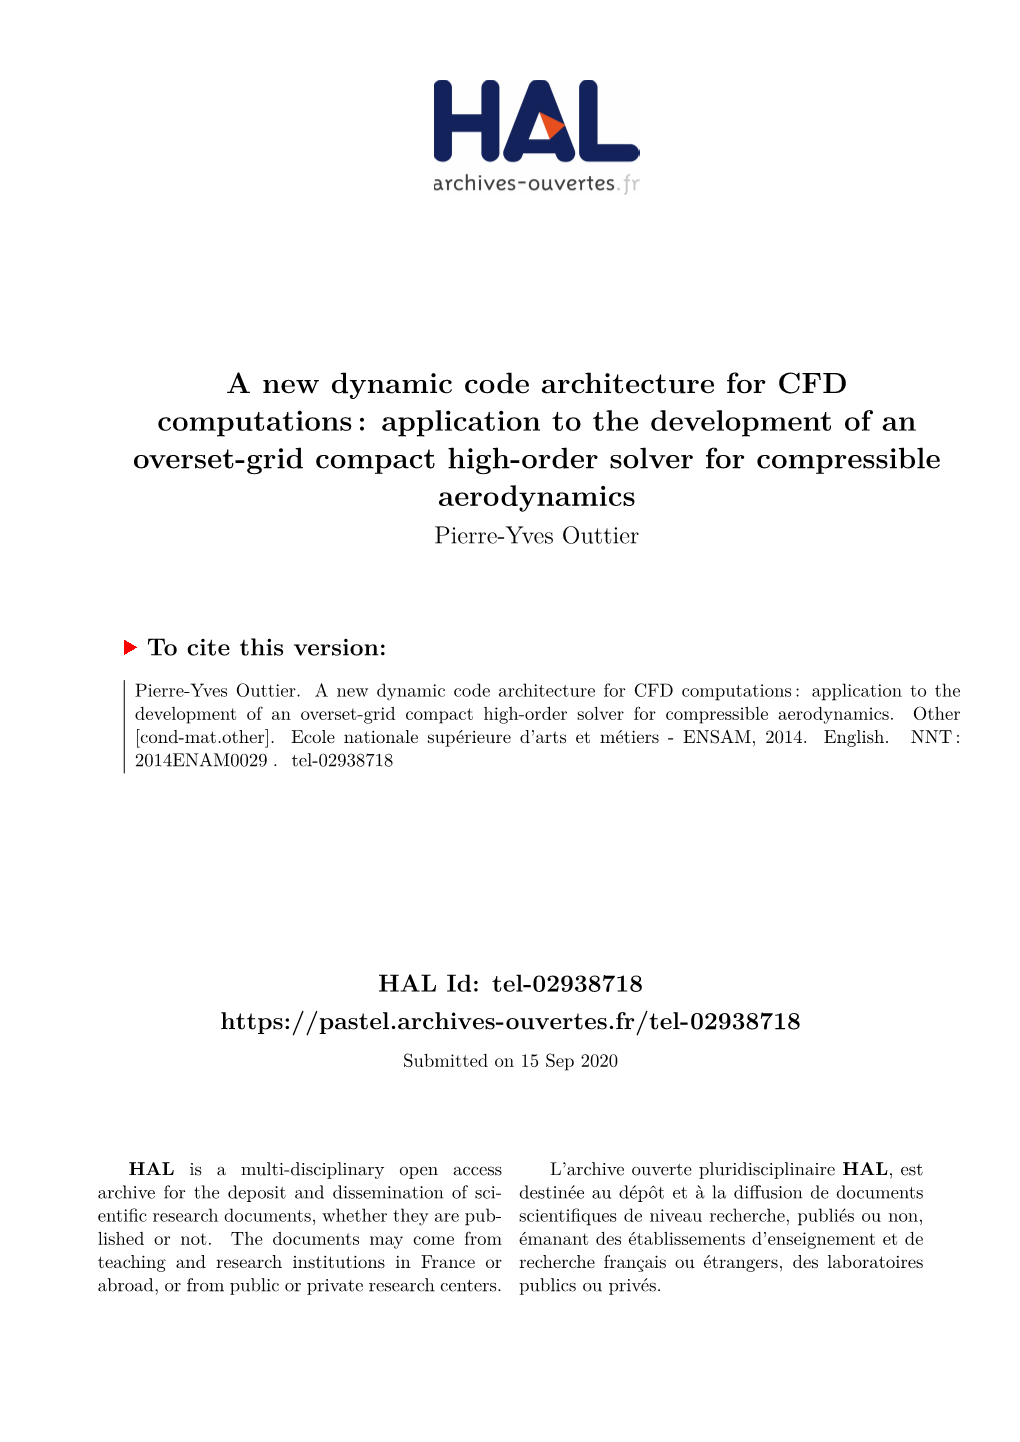 A New Dynamic Code Architecture for CFD Computations: Application to the Development of an Overset-Grid Compact High-Order Solver for Compressible Aerodynamics